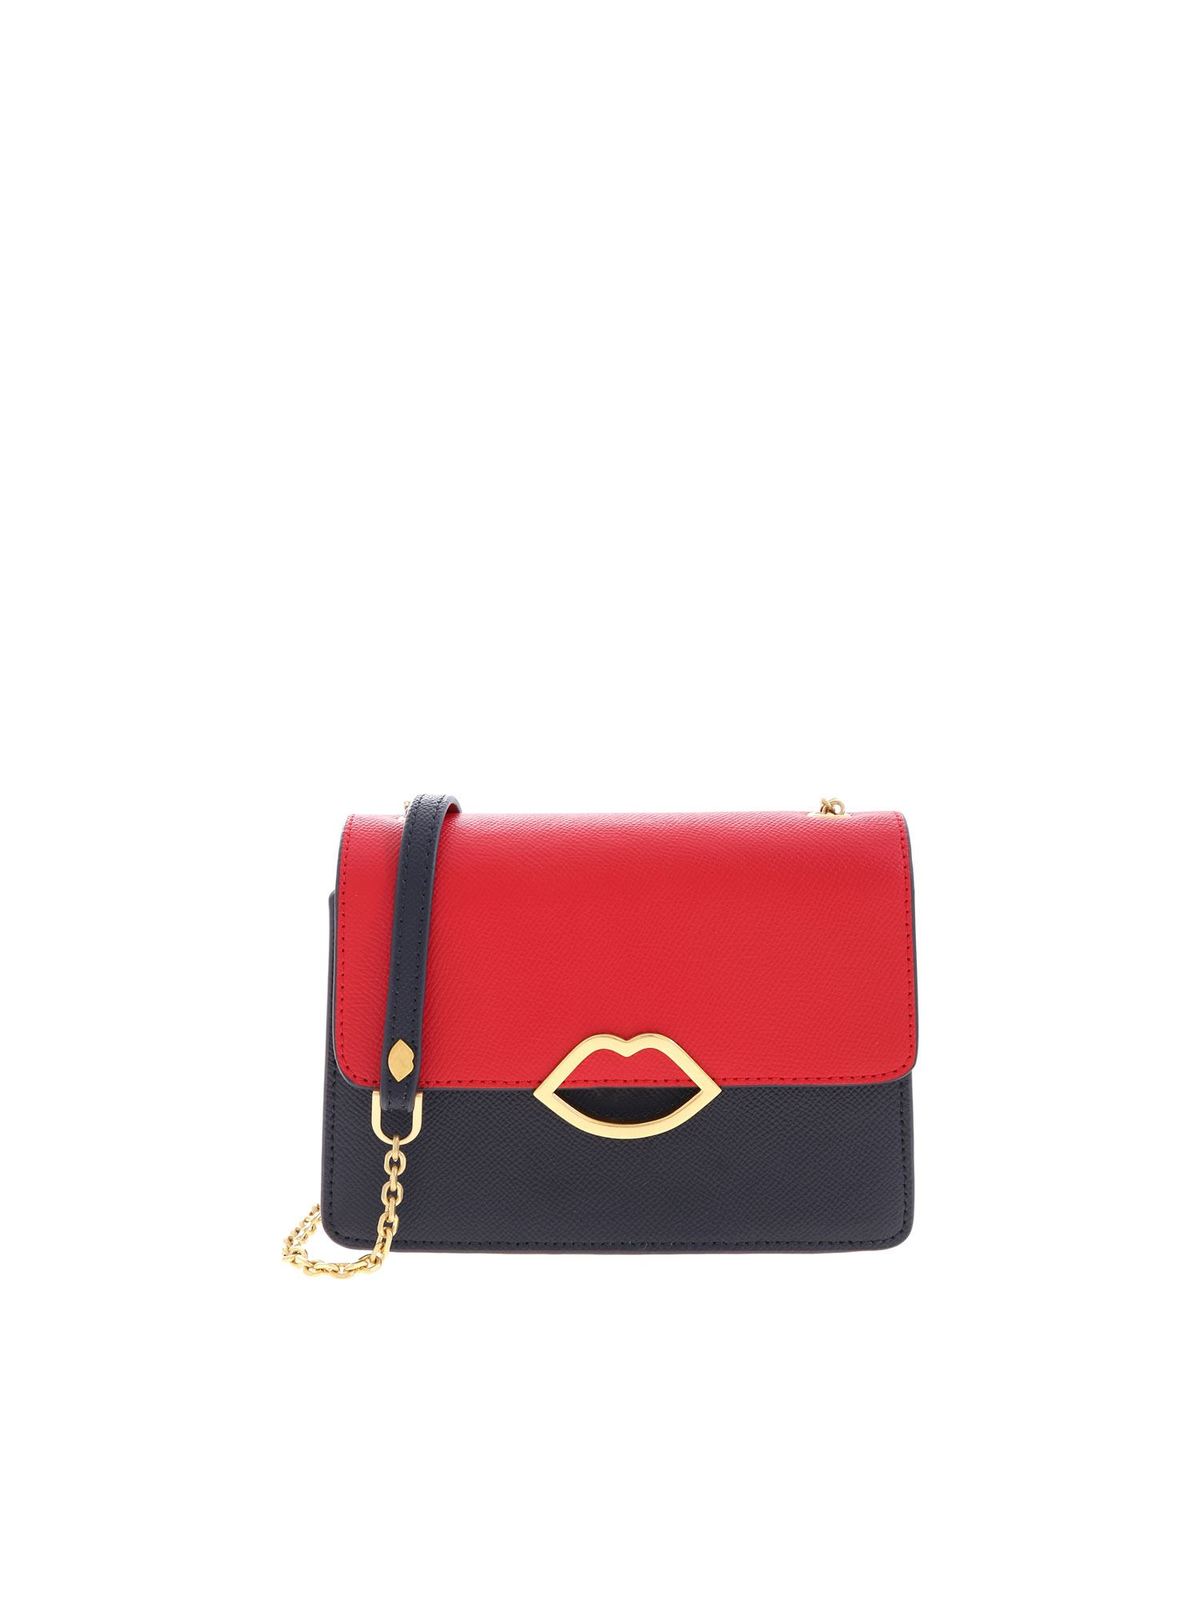 Lulu Guinness - Polly bag in red, white and blue - cross body bags ...